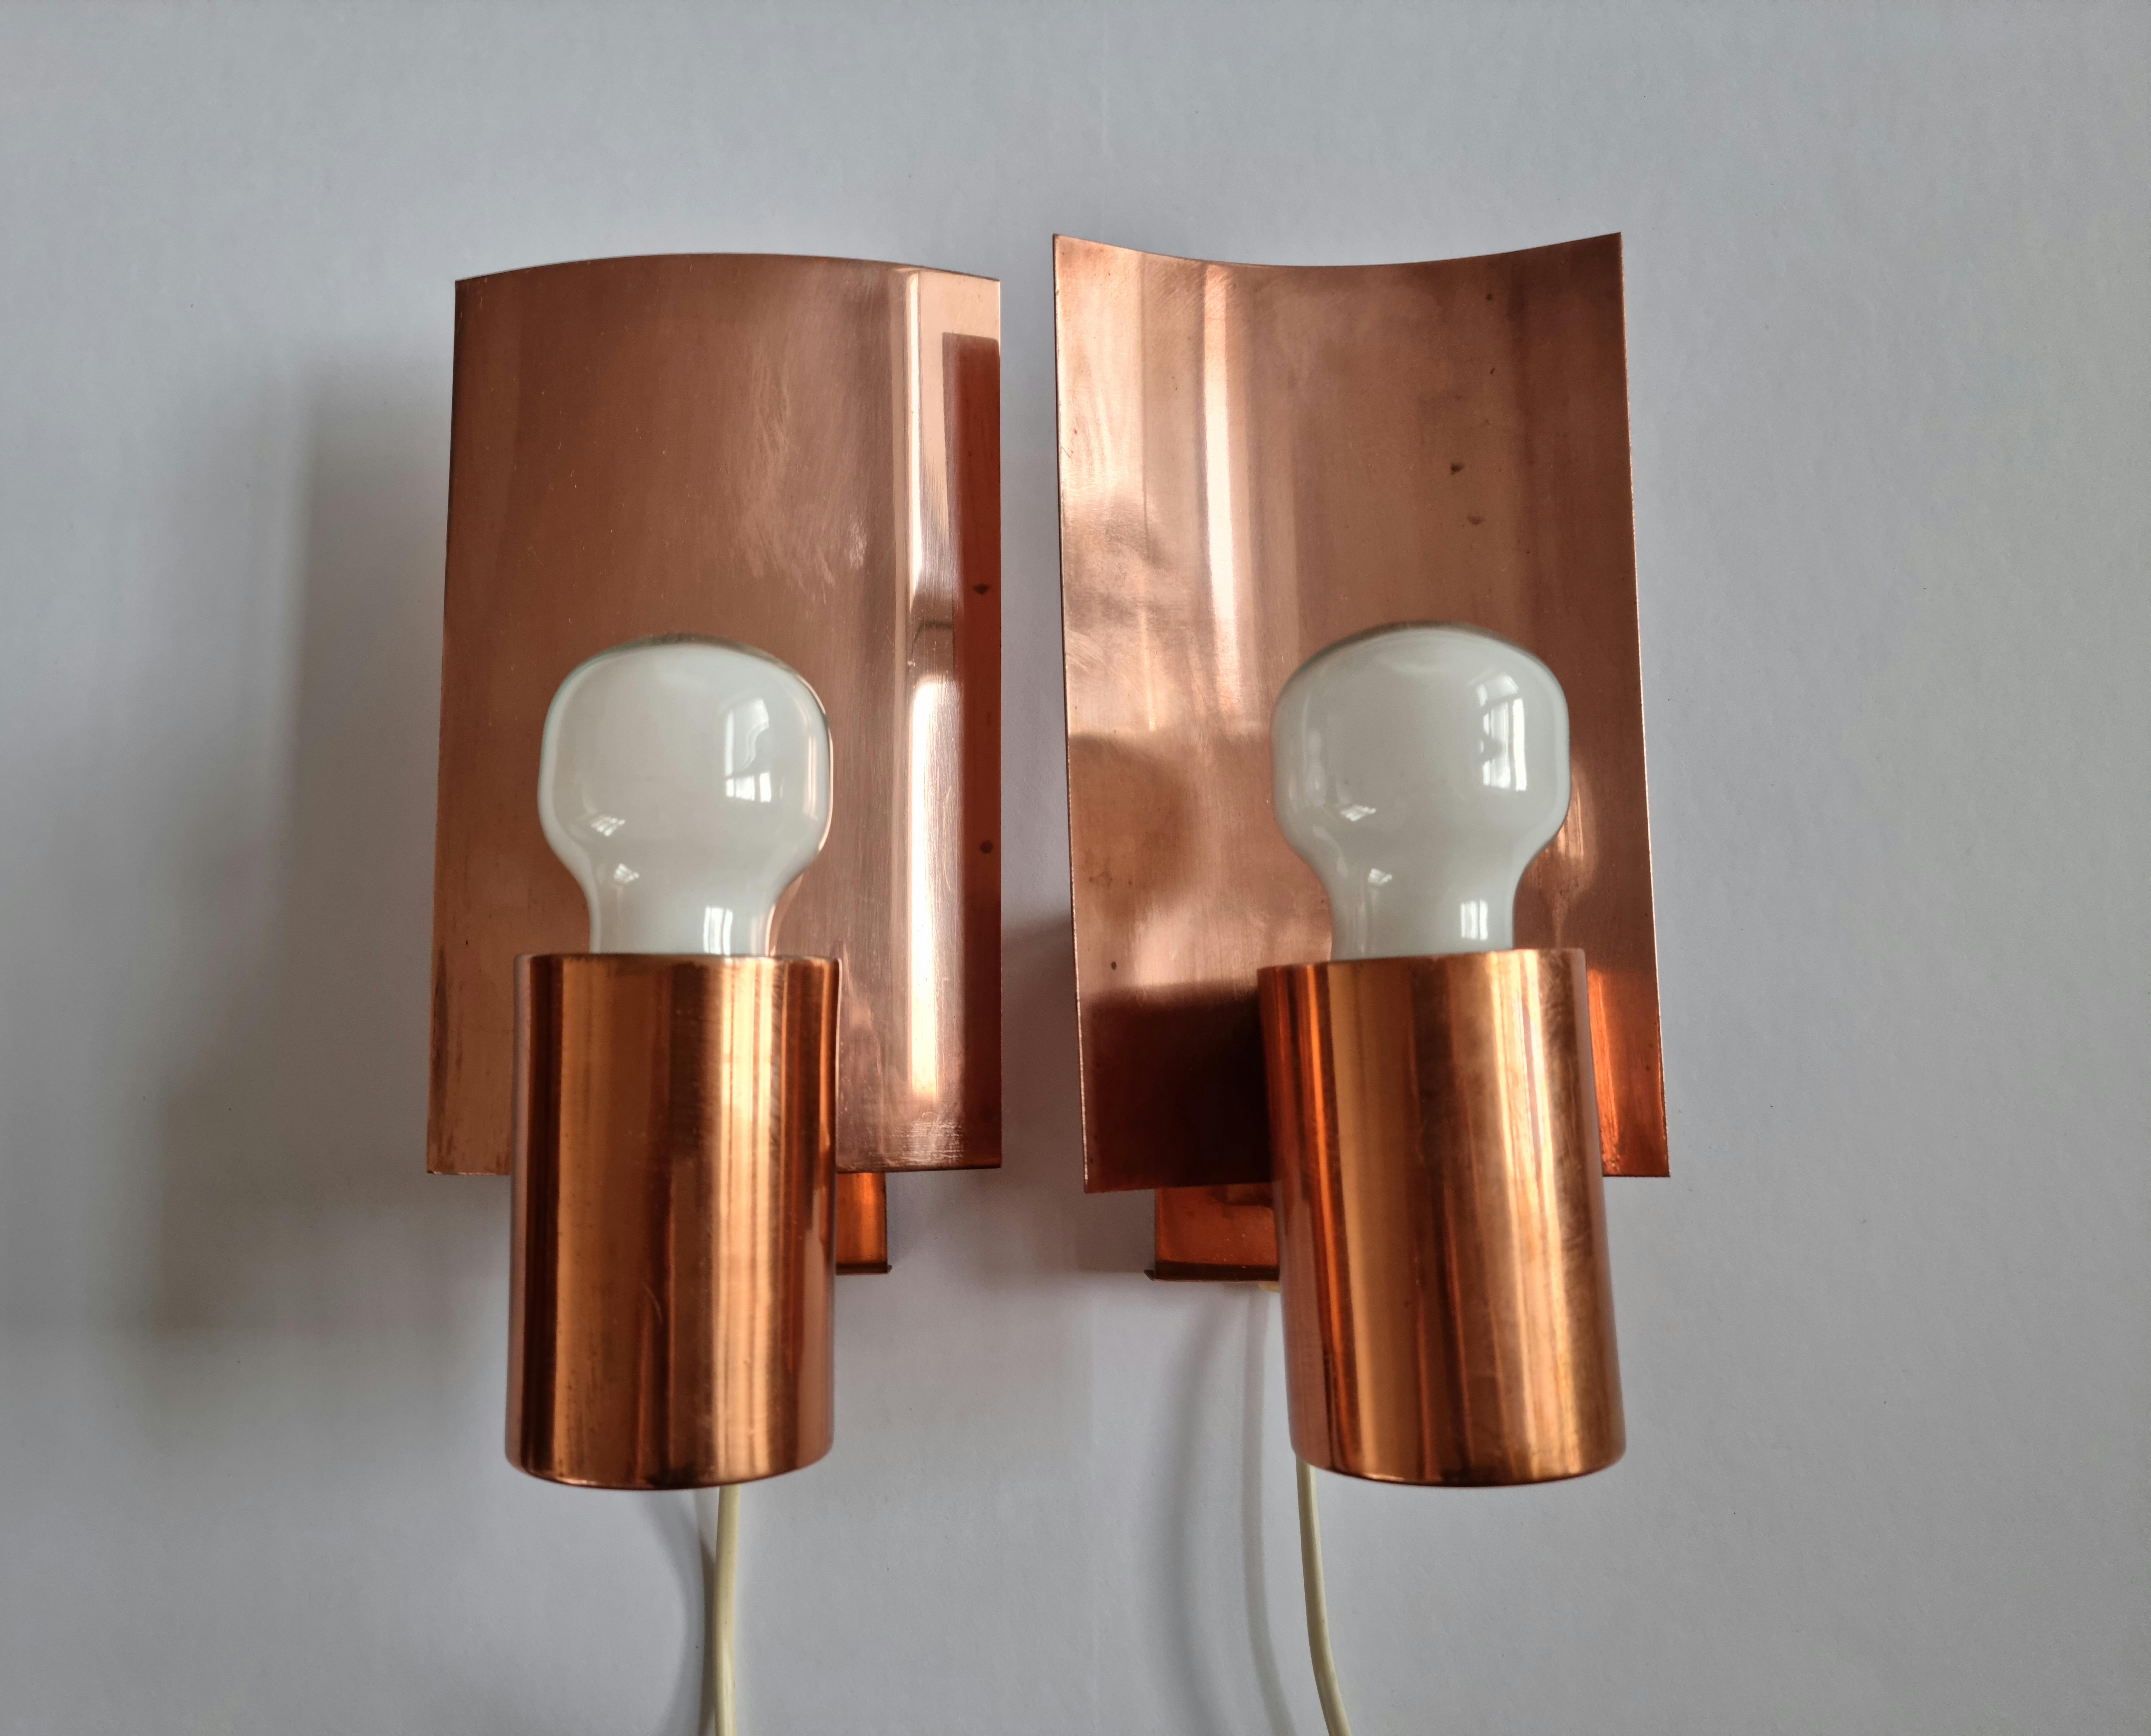 Pair of Midcentury Copper Wall Lamps, Denmark, 1960s For Sale 4